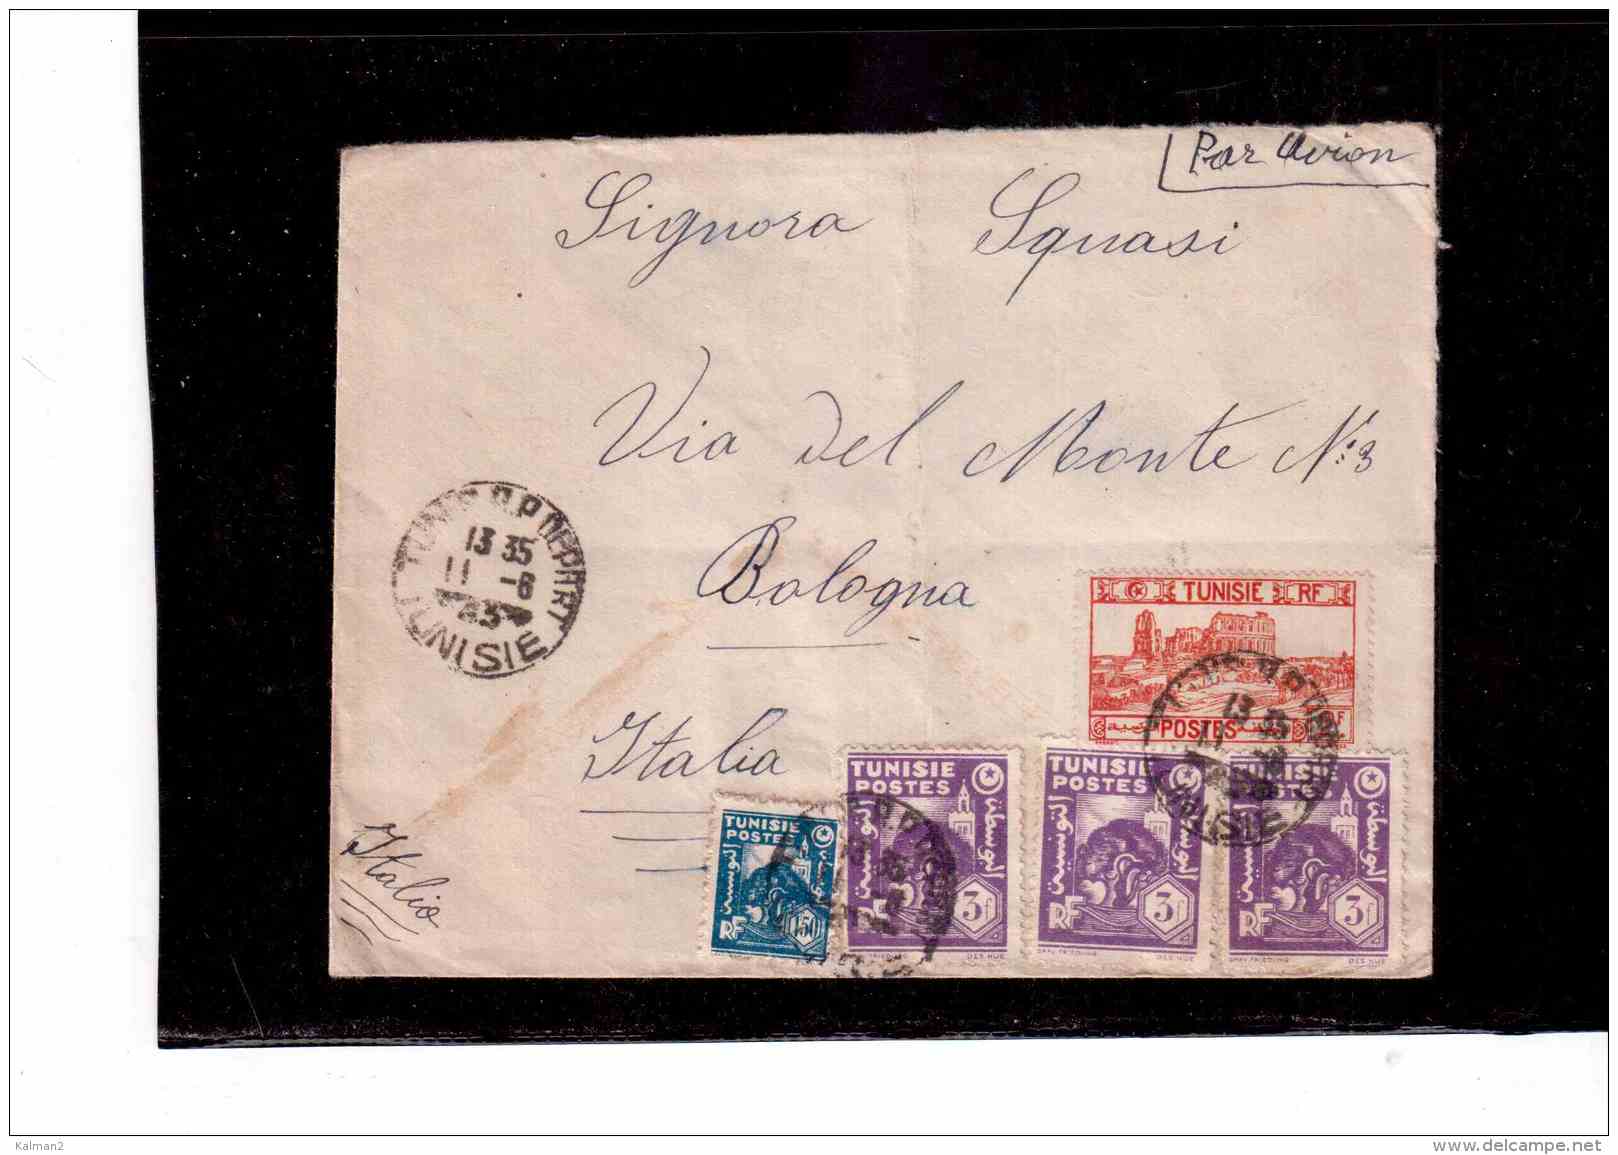 TEM8749    -  POSTAL HISTORY    "  TUNISIE  "  /       AIR MAIL LETTER  TO  ITALY   ON   11.6.1945 - Tunisia (1956-...)